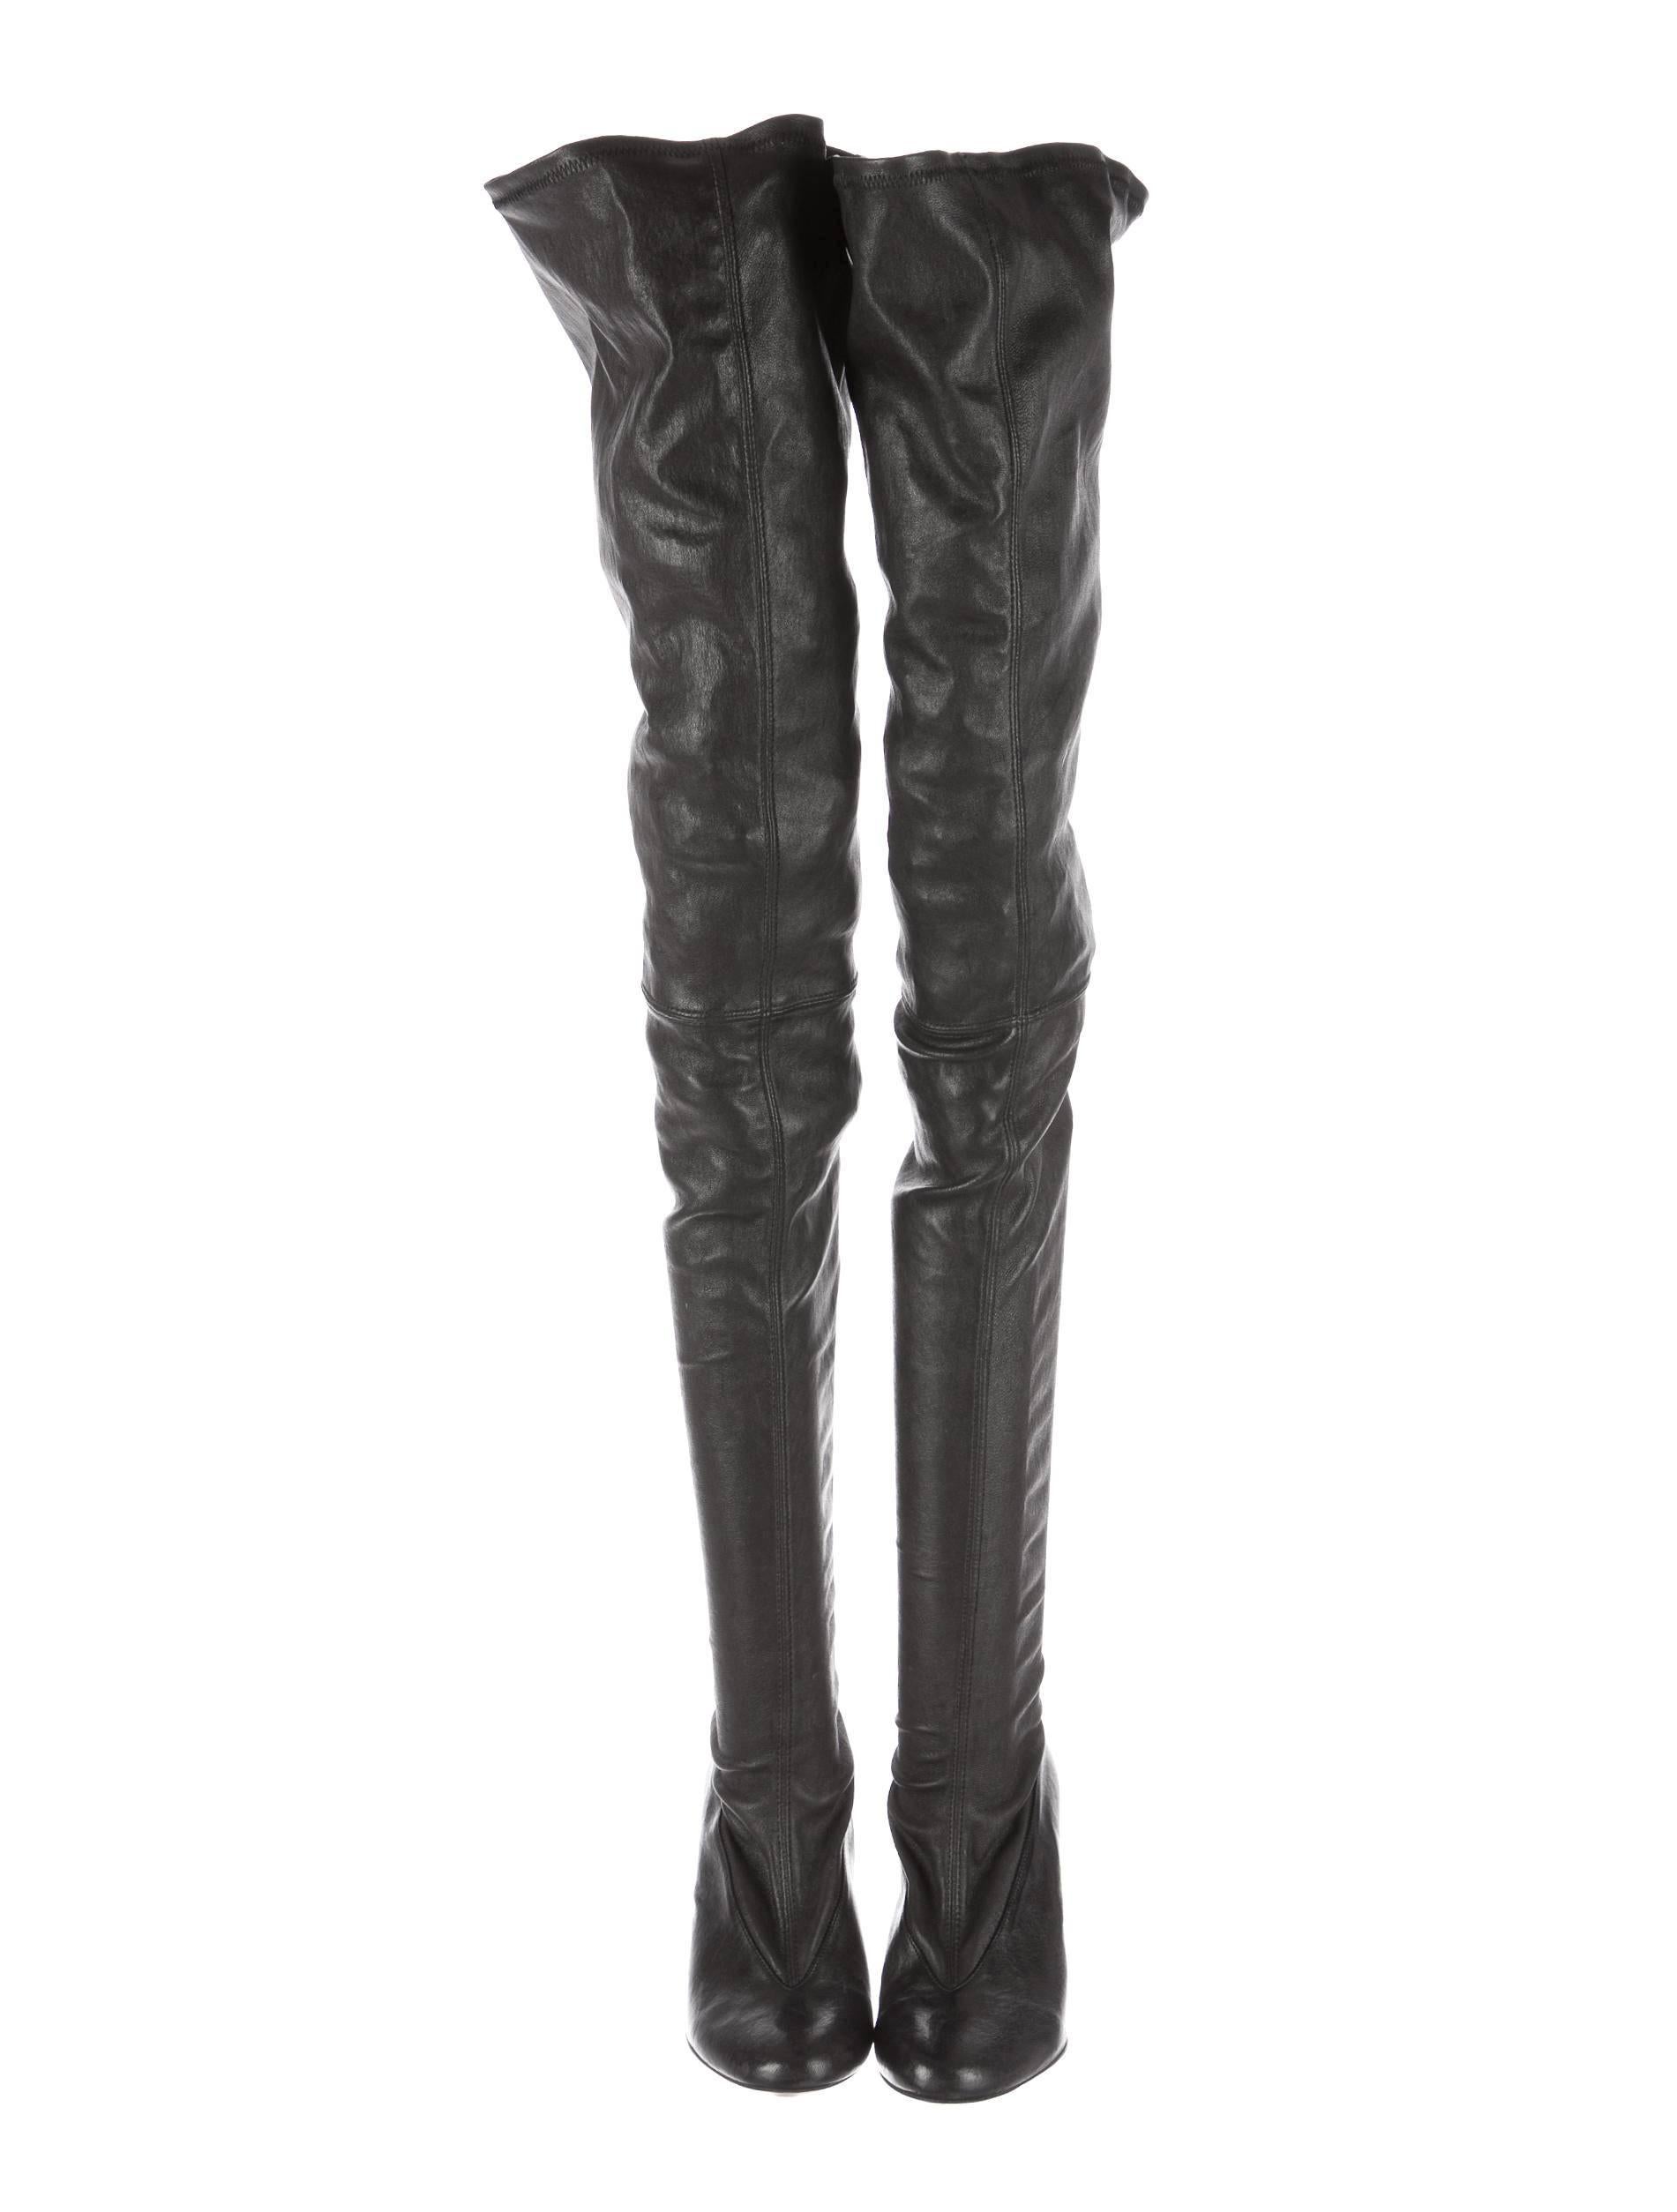 Black leather Maison Martin Margiela thigh high boots with back zipper closure and silver-tone nail stiletto 4